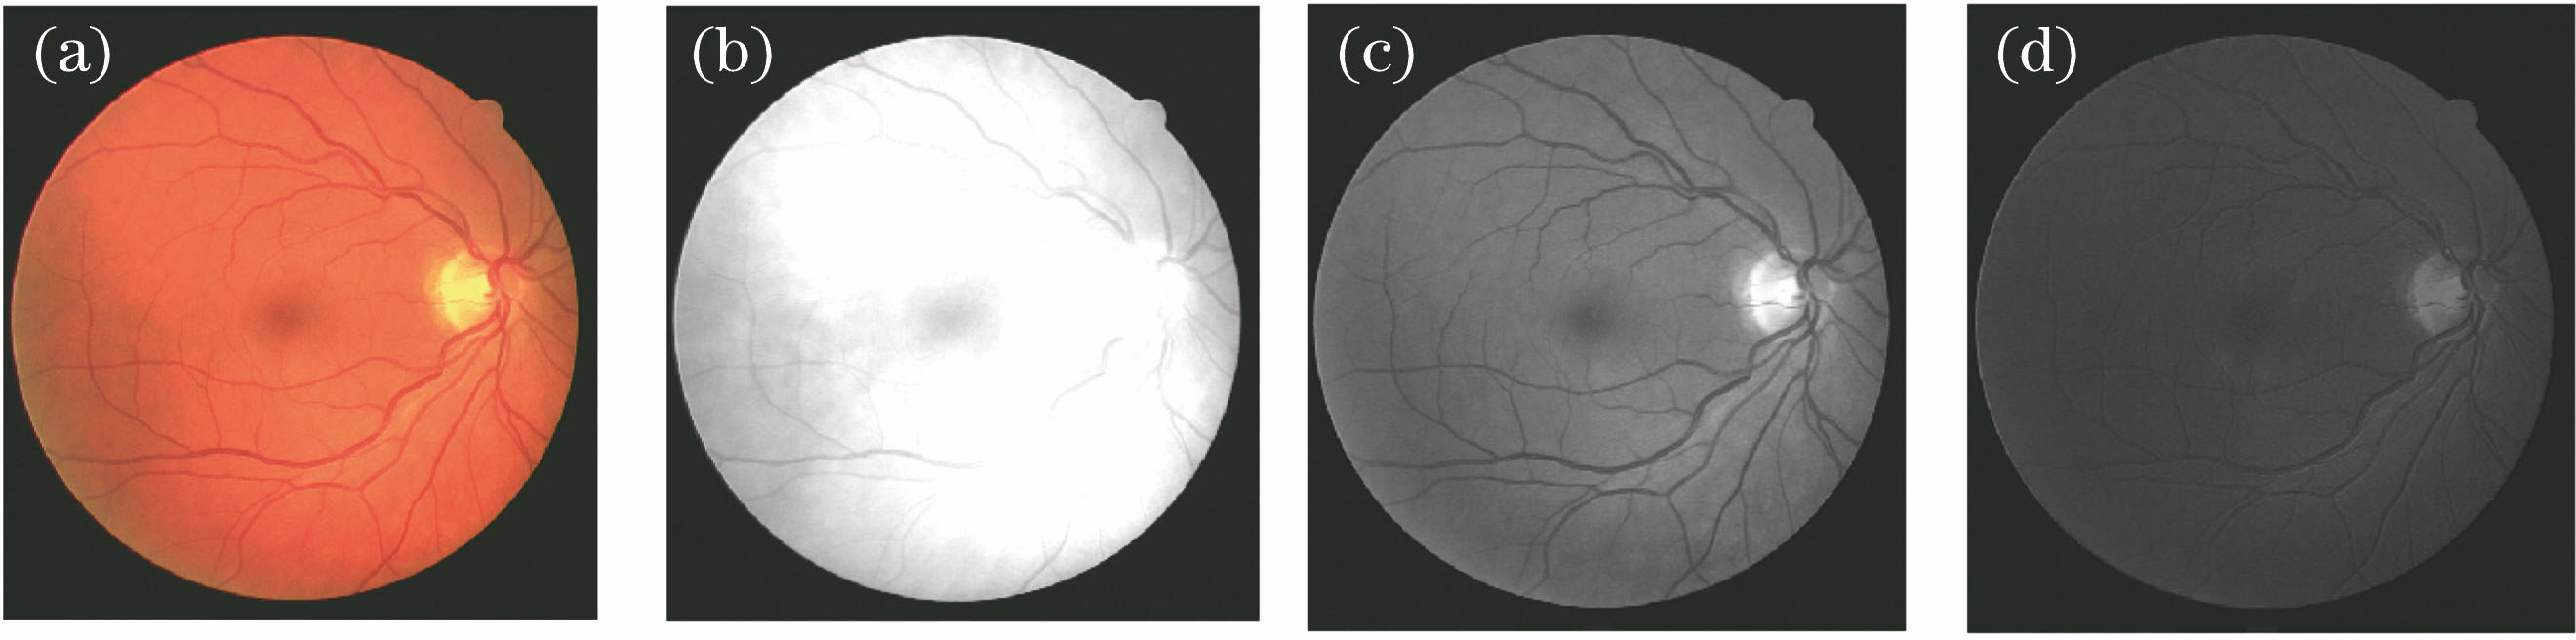 Comparison of extracted results of green channel and other channels. (a) Color fundus image; (b) red channel; (c) green channel; (d) blue channel